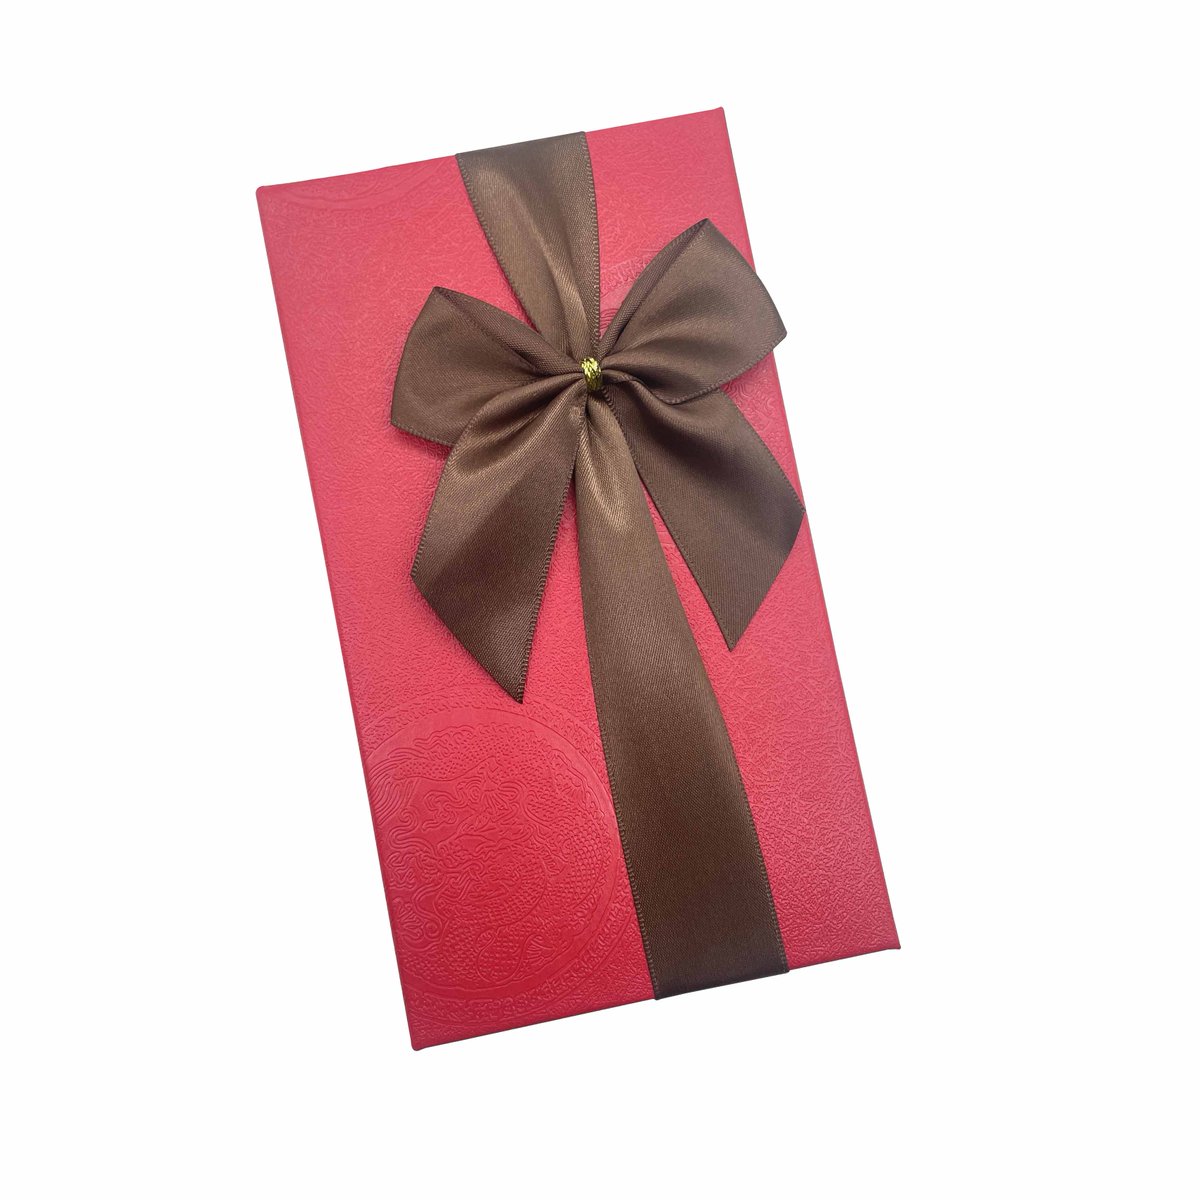 Soft satin ribbons for your chocolate packaging. 
Available wide ranging from 3mm to 100mm. With up to 196 different colors to choose from. 
Customized is also available. 
Contact us now. xmfeqi.com
#satinribbon #ribbon #chocolates #giftbox #ribbonsupplier #diycrafts